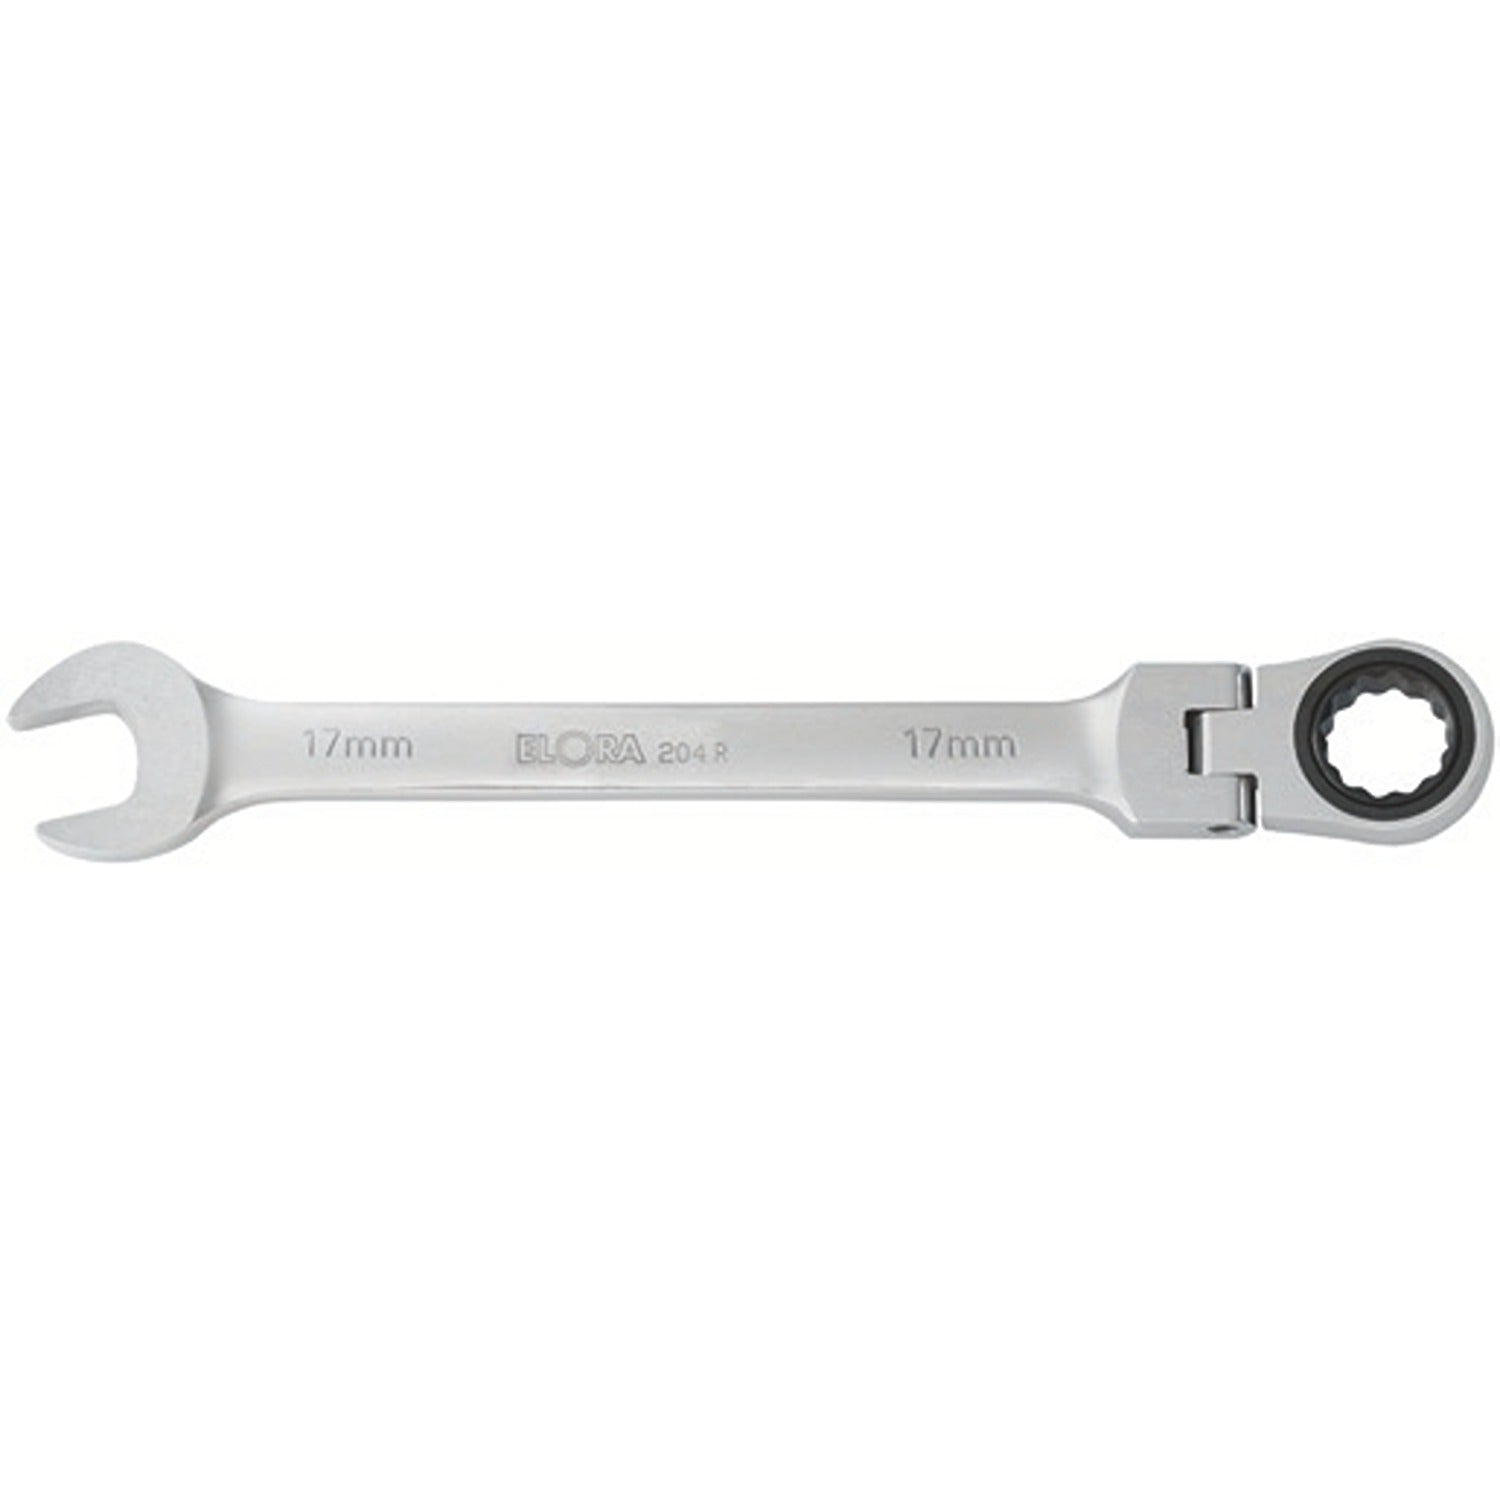 ELORA 204-R Combination Spanner Ring Ratchet (ELORA Tools) - Premium Combination Spanner from ELORA - Shop now at Yew Aik.